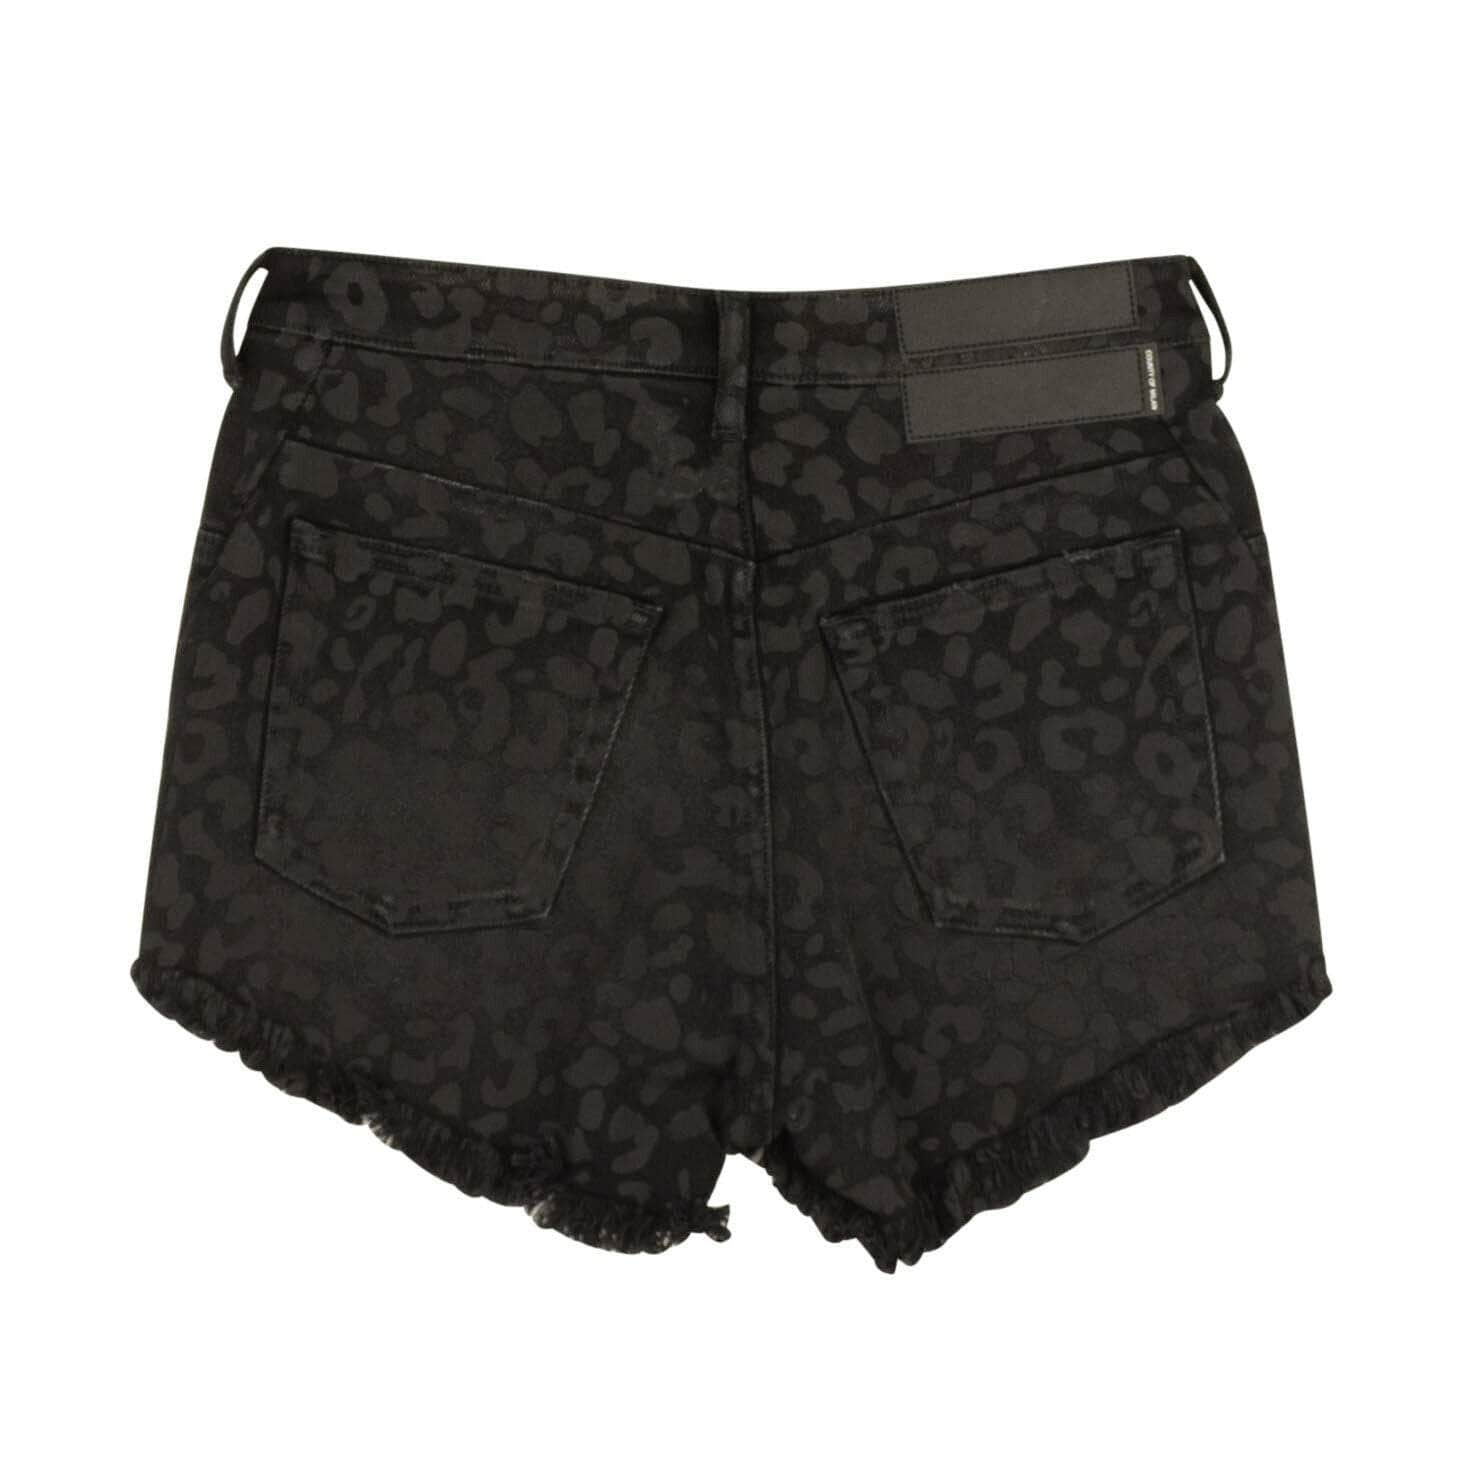 Marcelo Burlon 250-500, channelenable-all, chicmi, couponcollection, gender-womens, main-clothing, marcelo-burlon, size-27 27 Black Leopard Print Denim Shorts 82NGG-MB-1212/27 82NGG-MB-1212/27